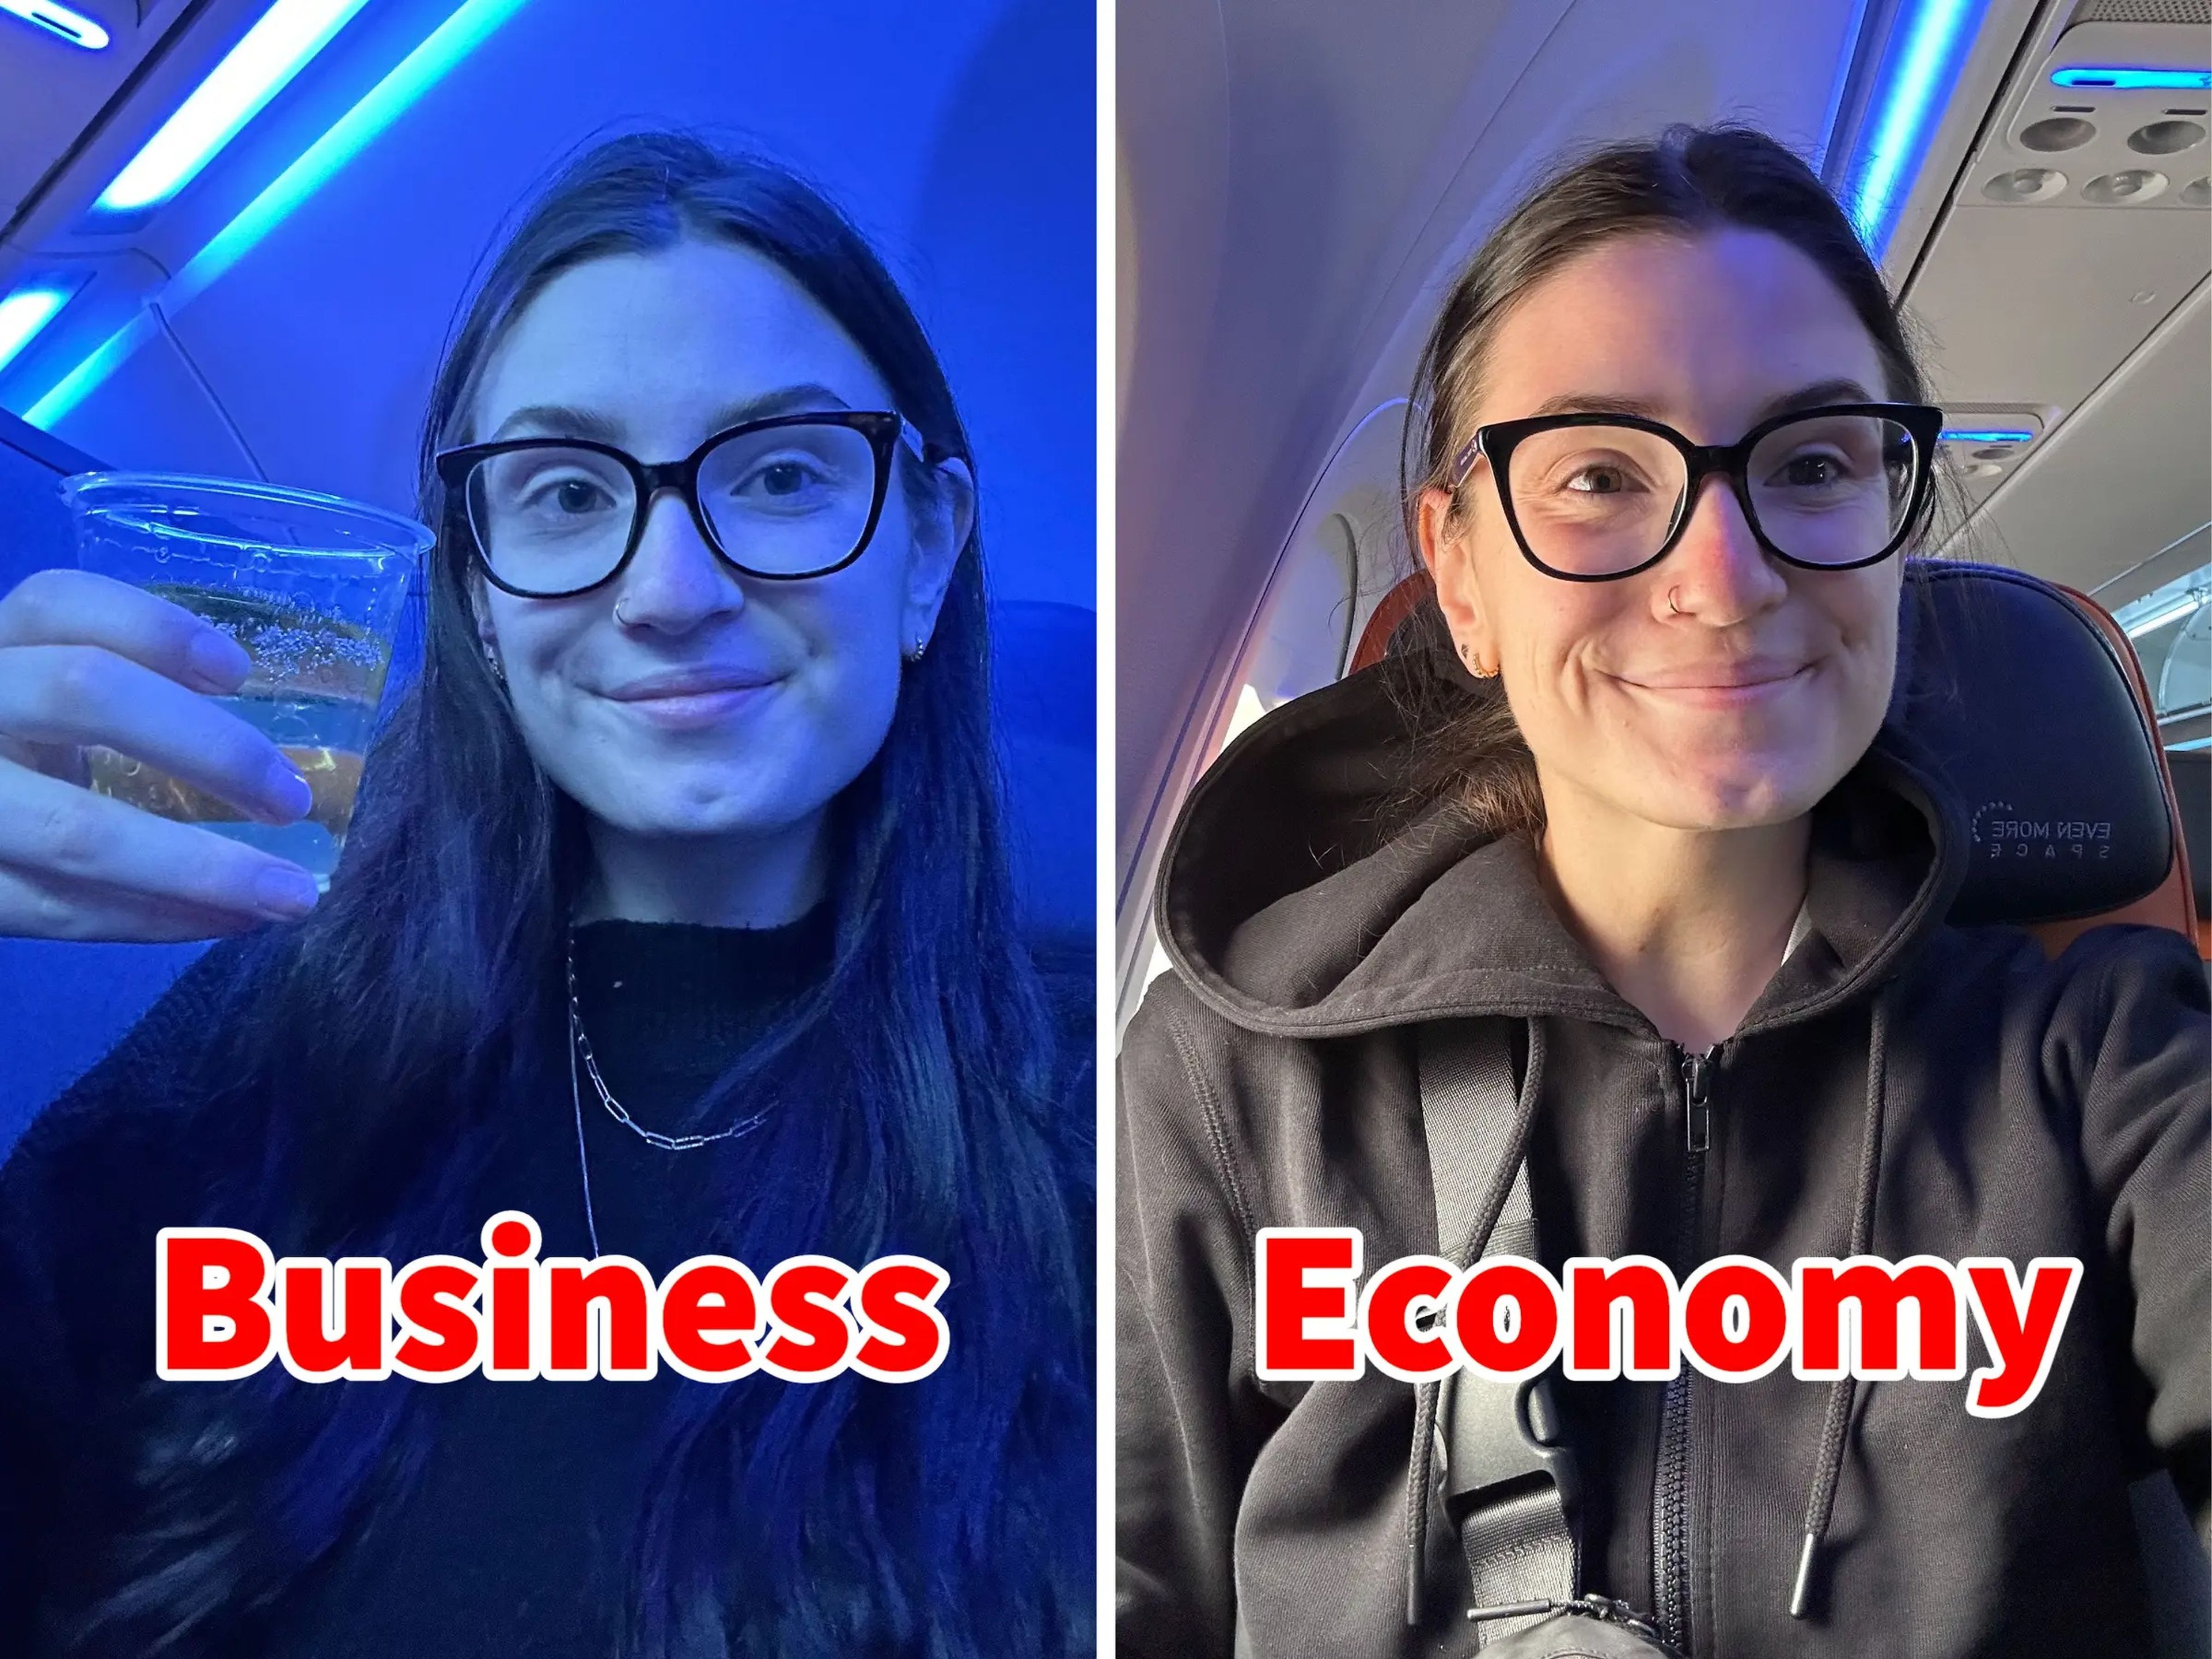 Insider's reporter in JetBlue's business class and economy class.